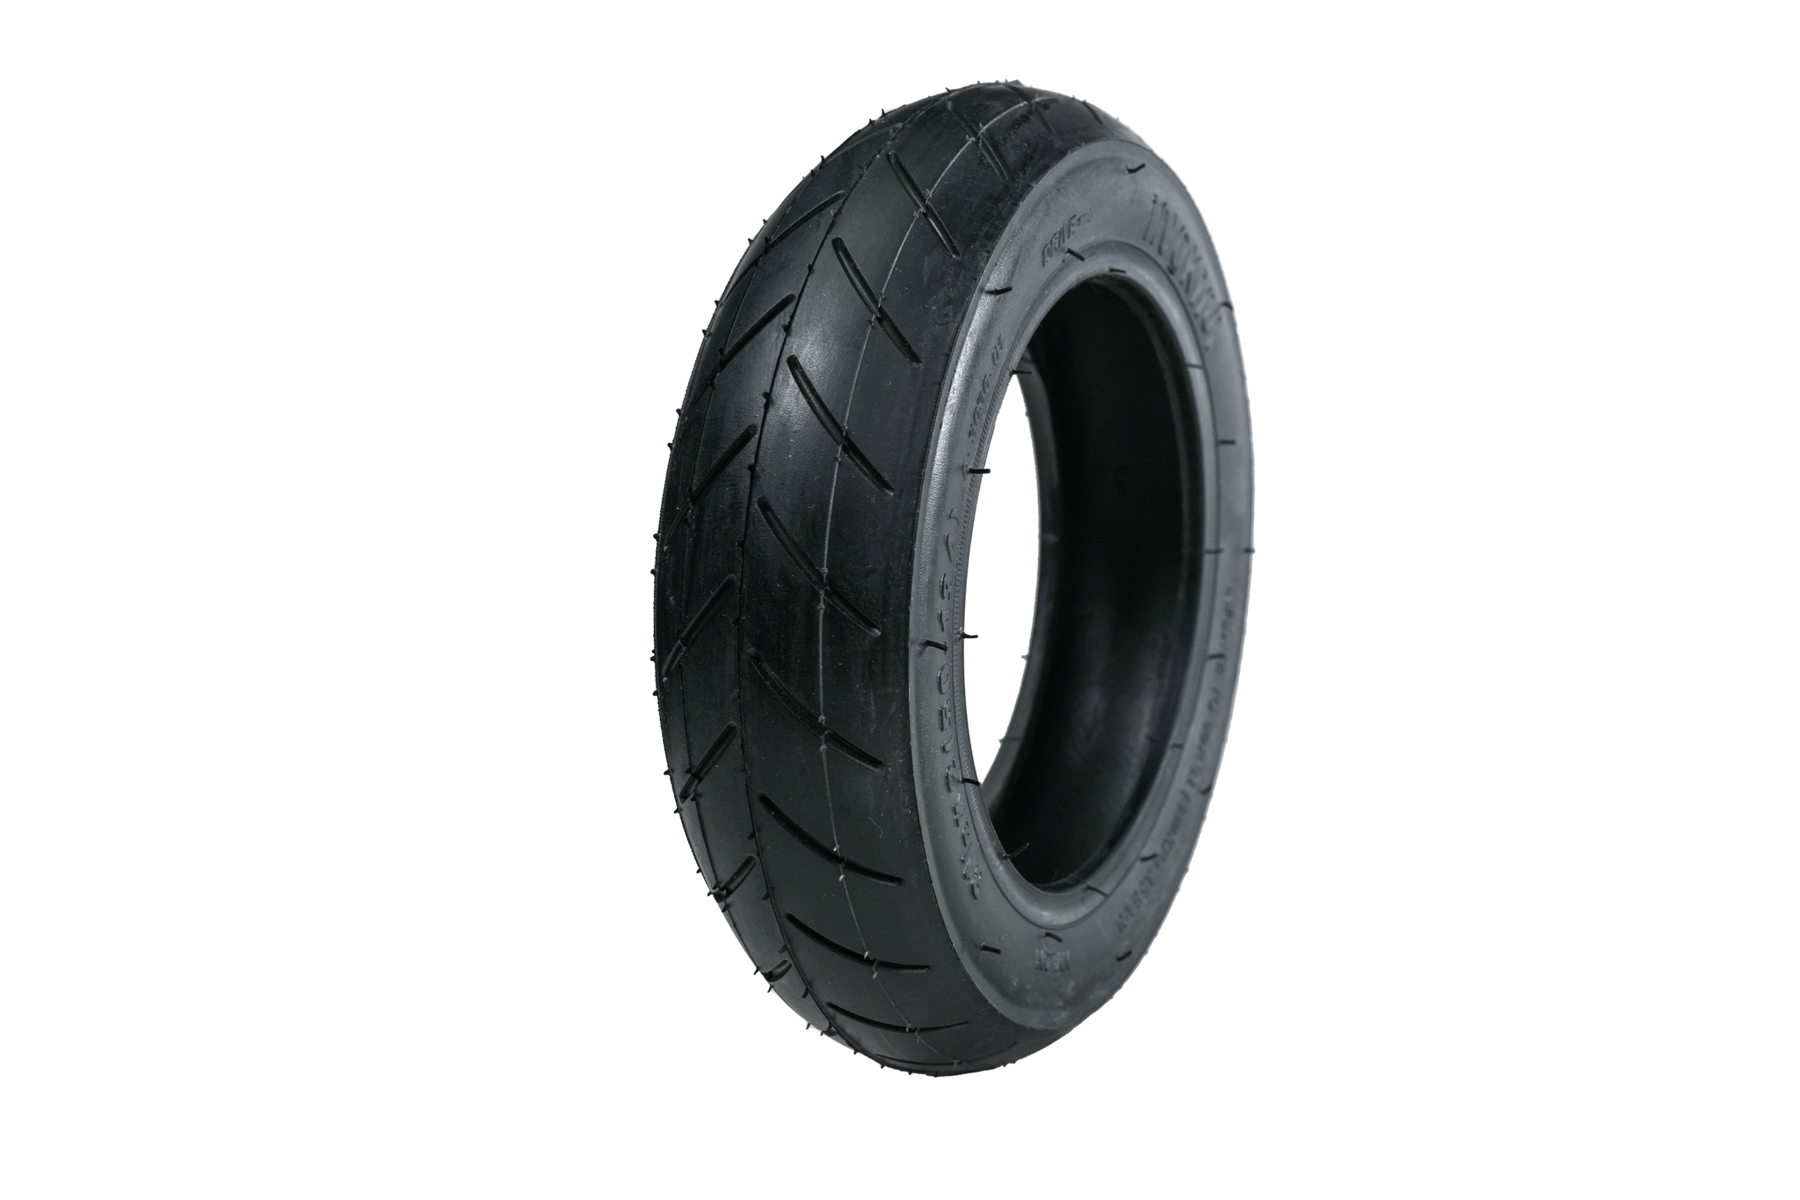 Inokim Street Tire For OXO, OX, Light And Quick 4 Models